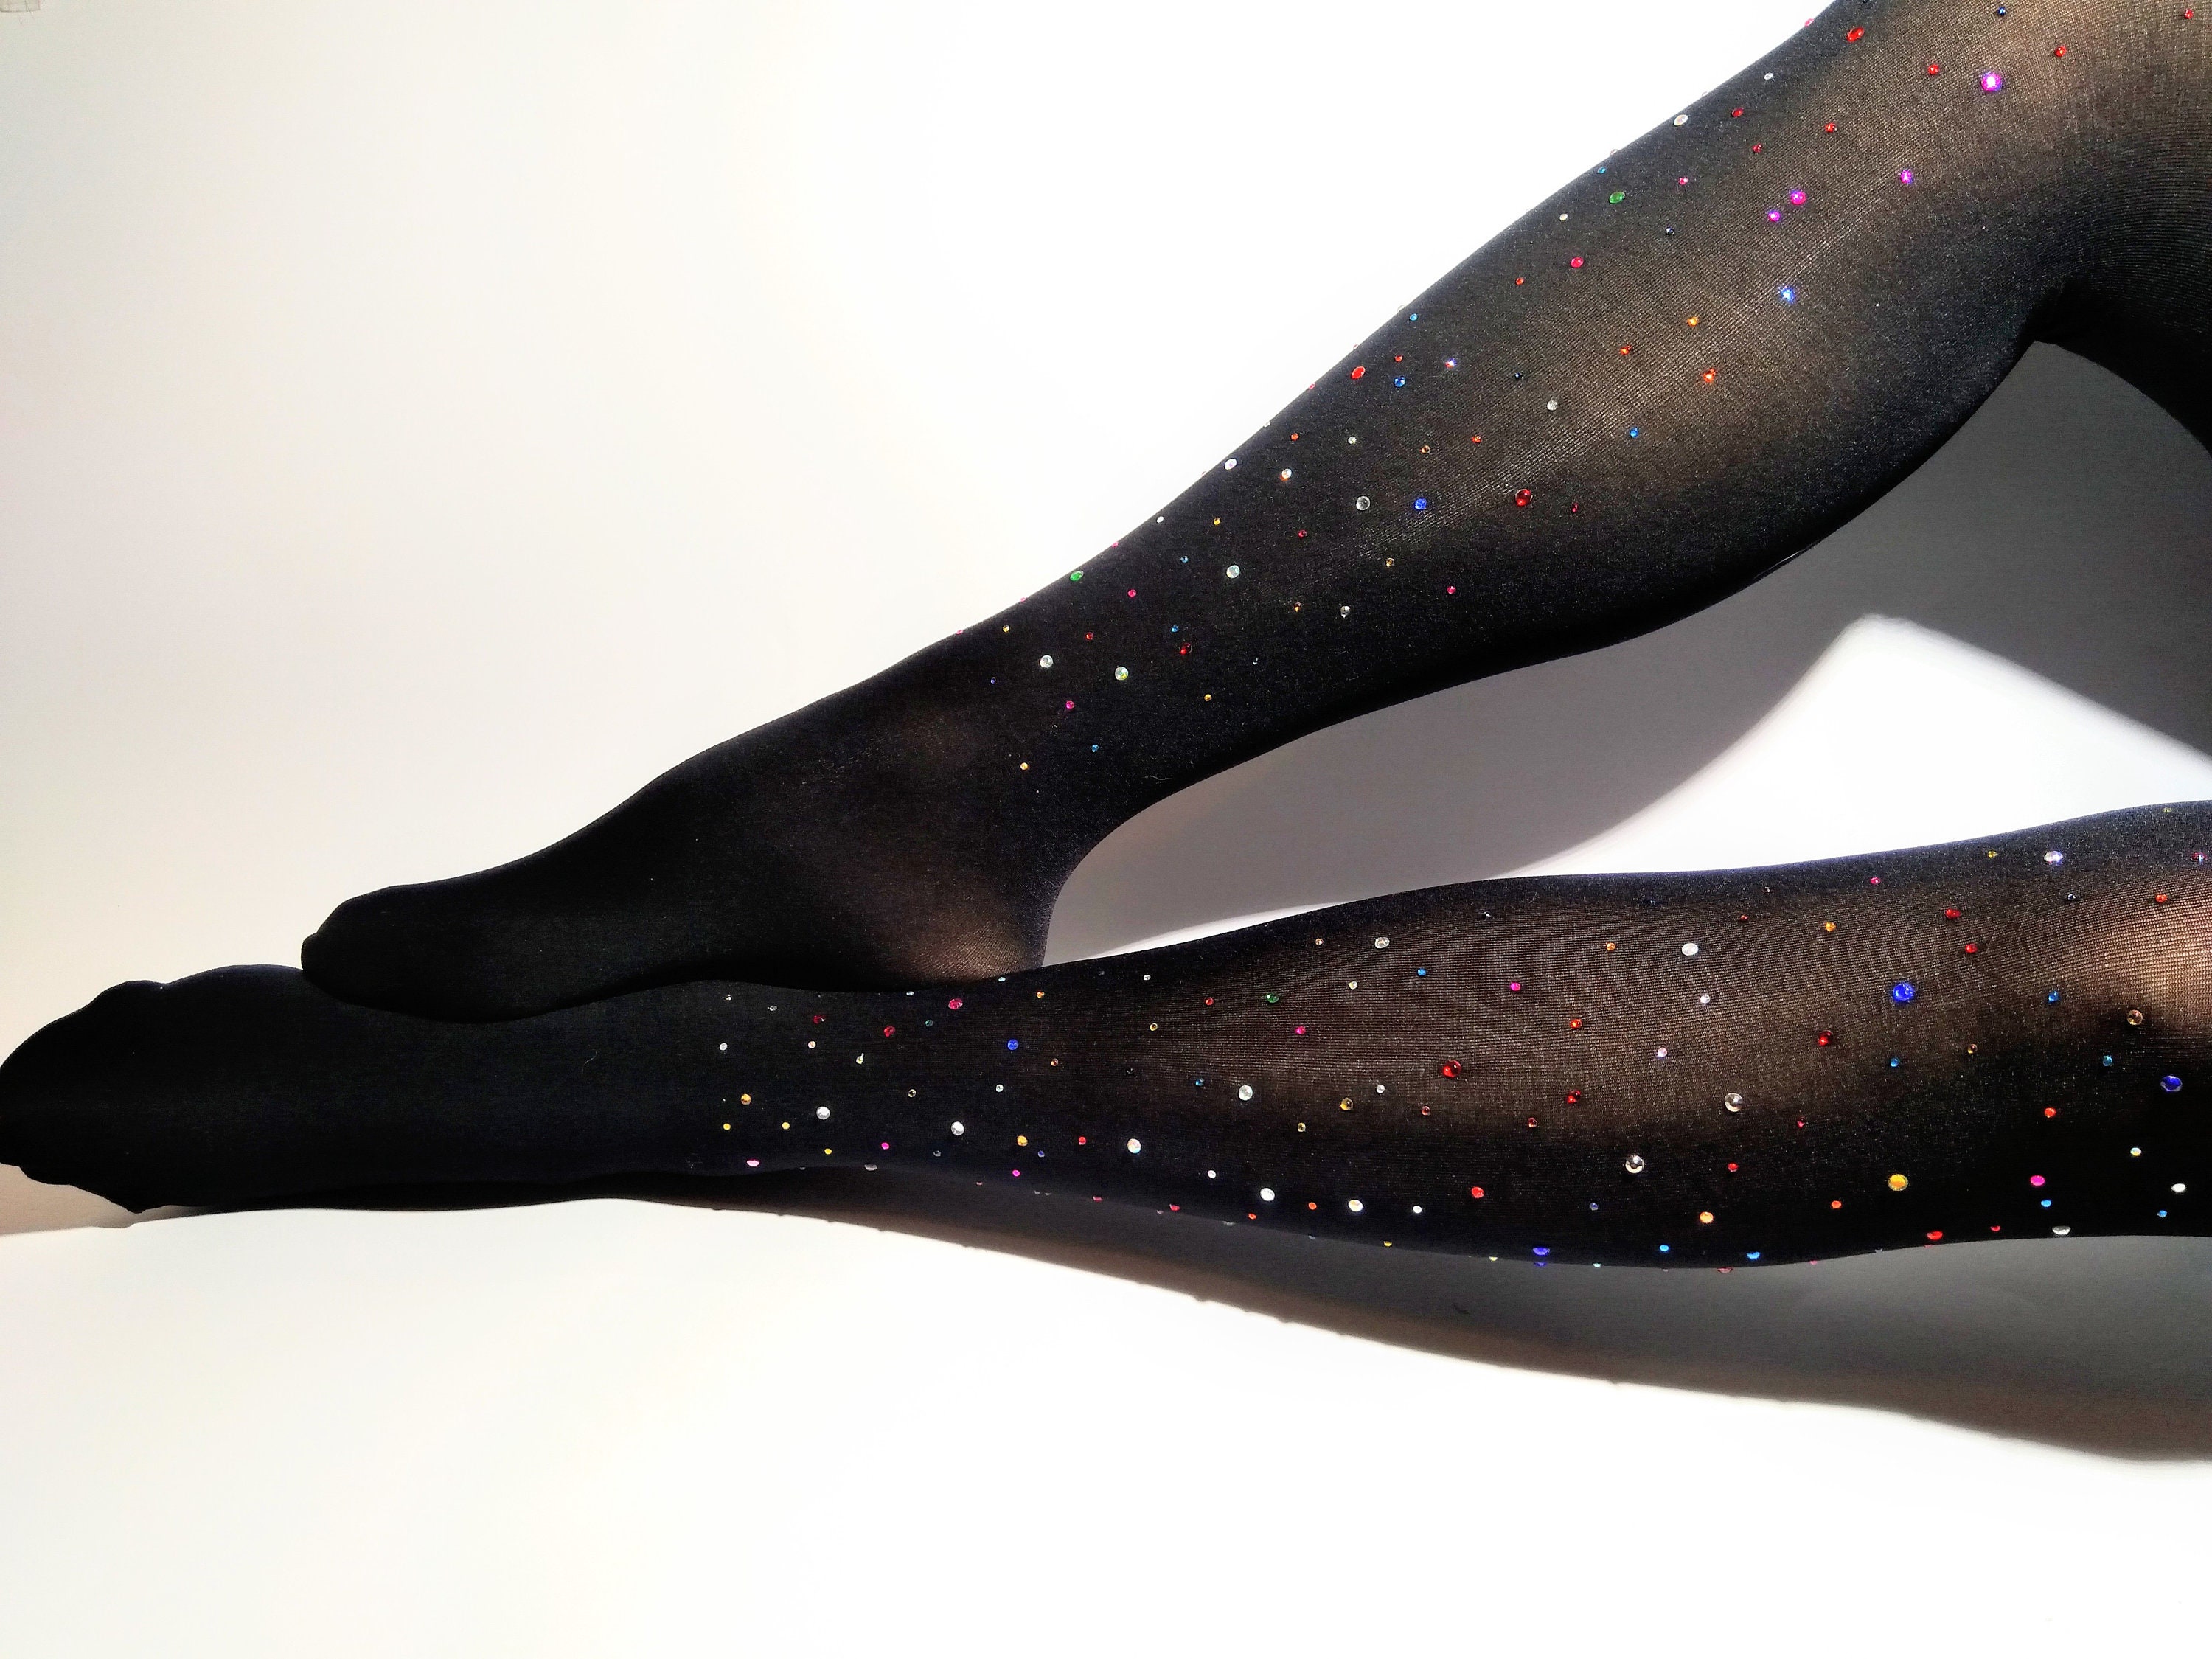 Tights for Women Embellished. Rhinestones Sparkle Opaque Black